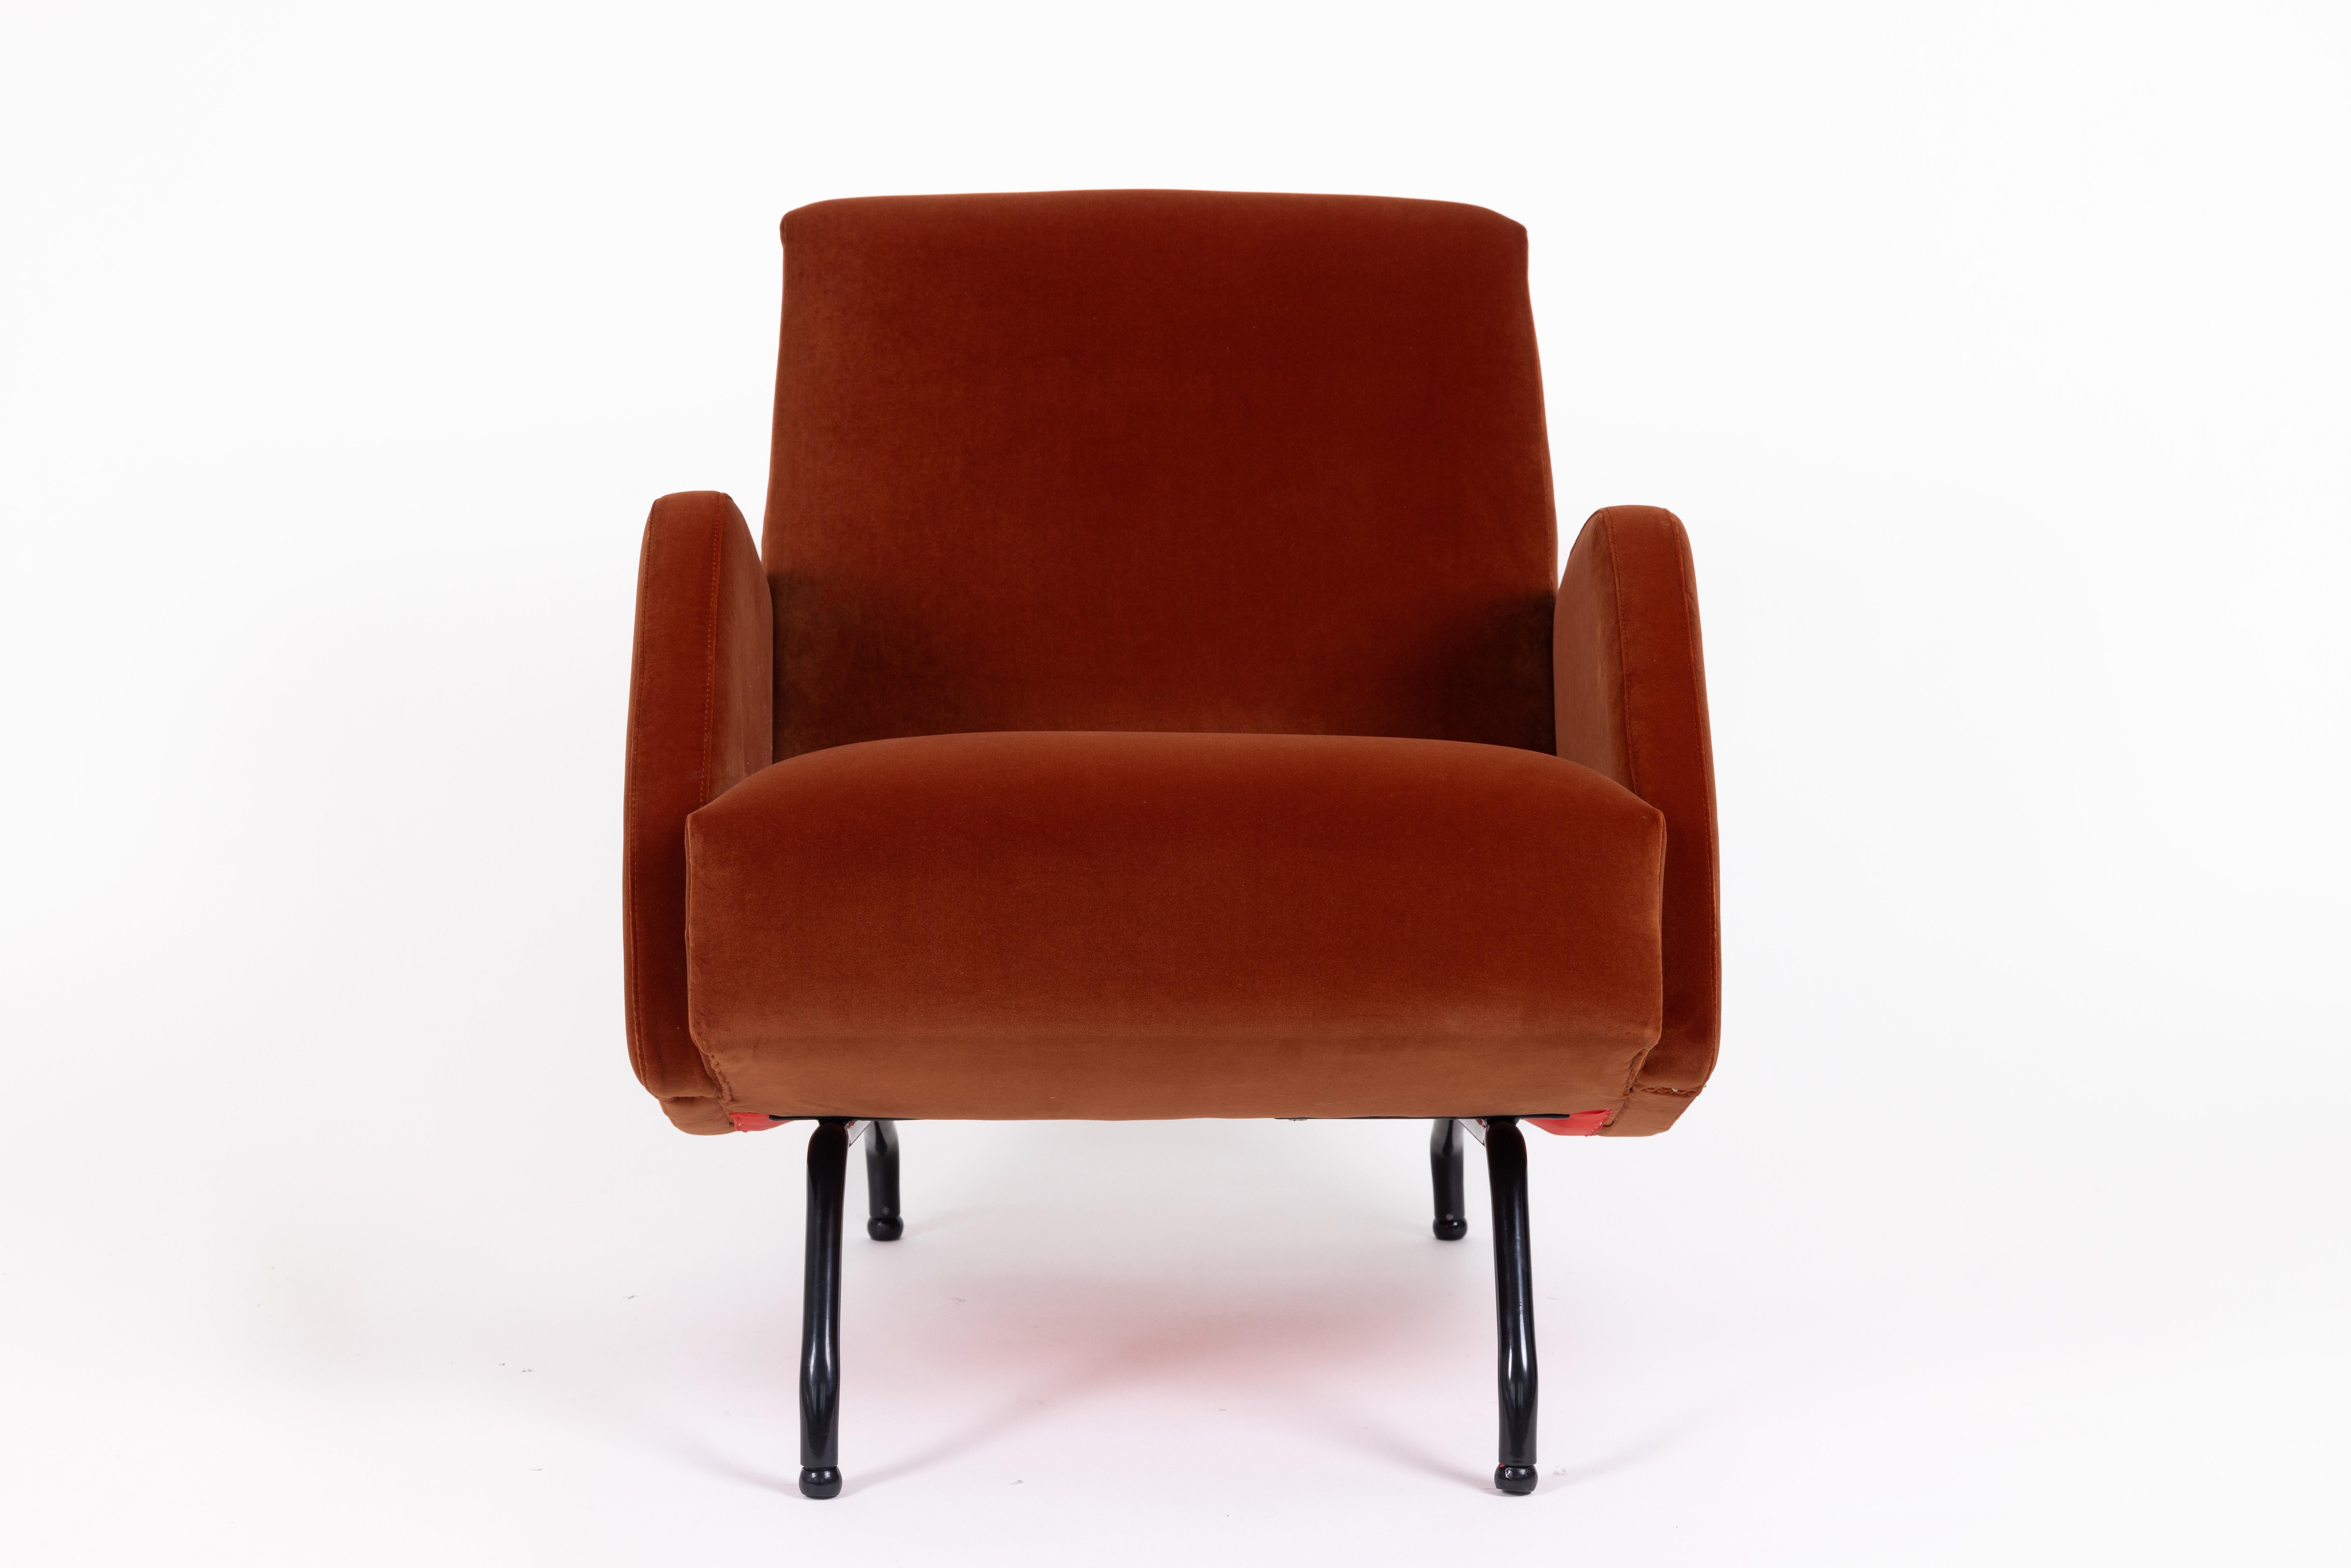 Rare armchair by Janusz Różański, Poland 1950s, completely restored and upholstered with a cotton velvet by Holly Hunt. Black painted metal legs